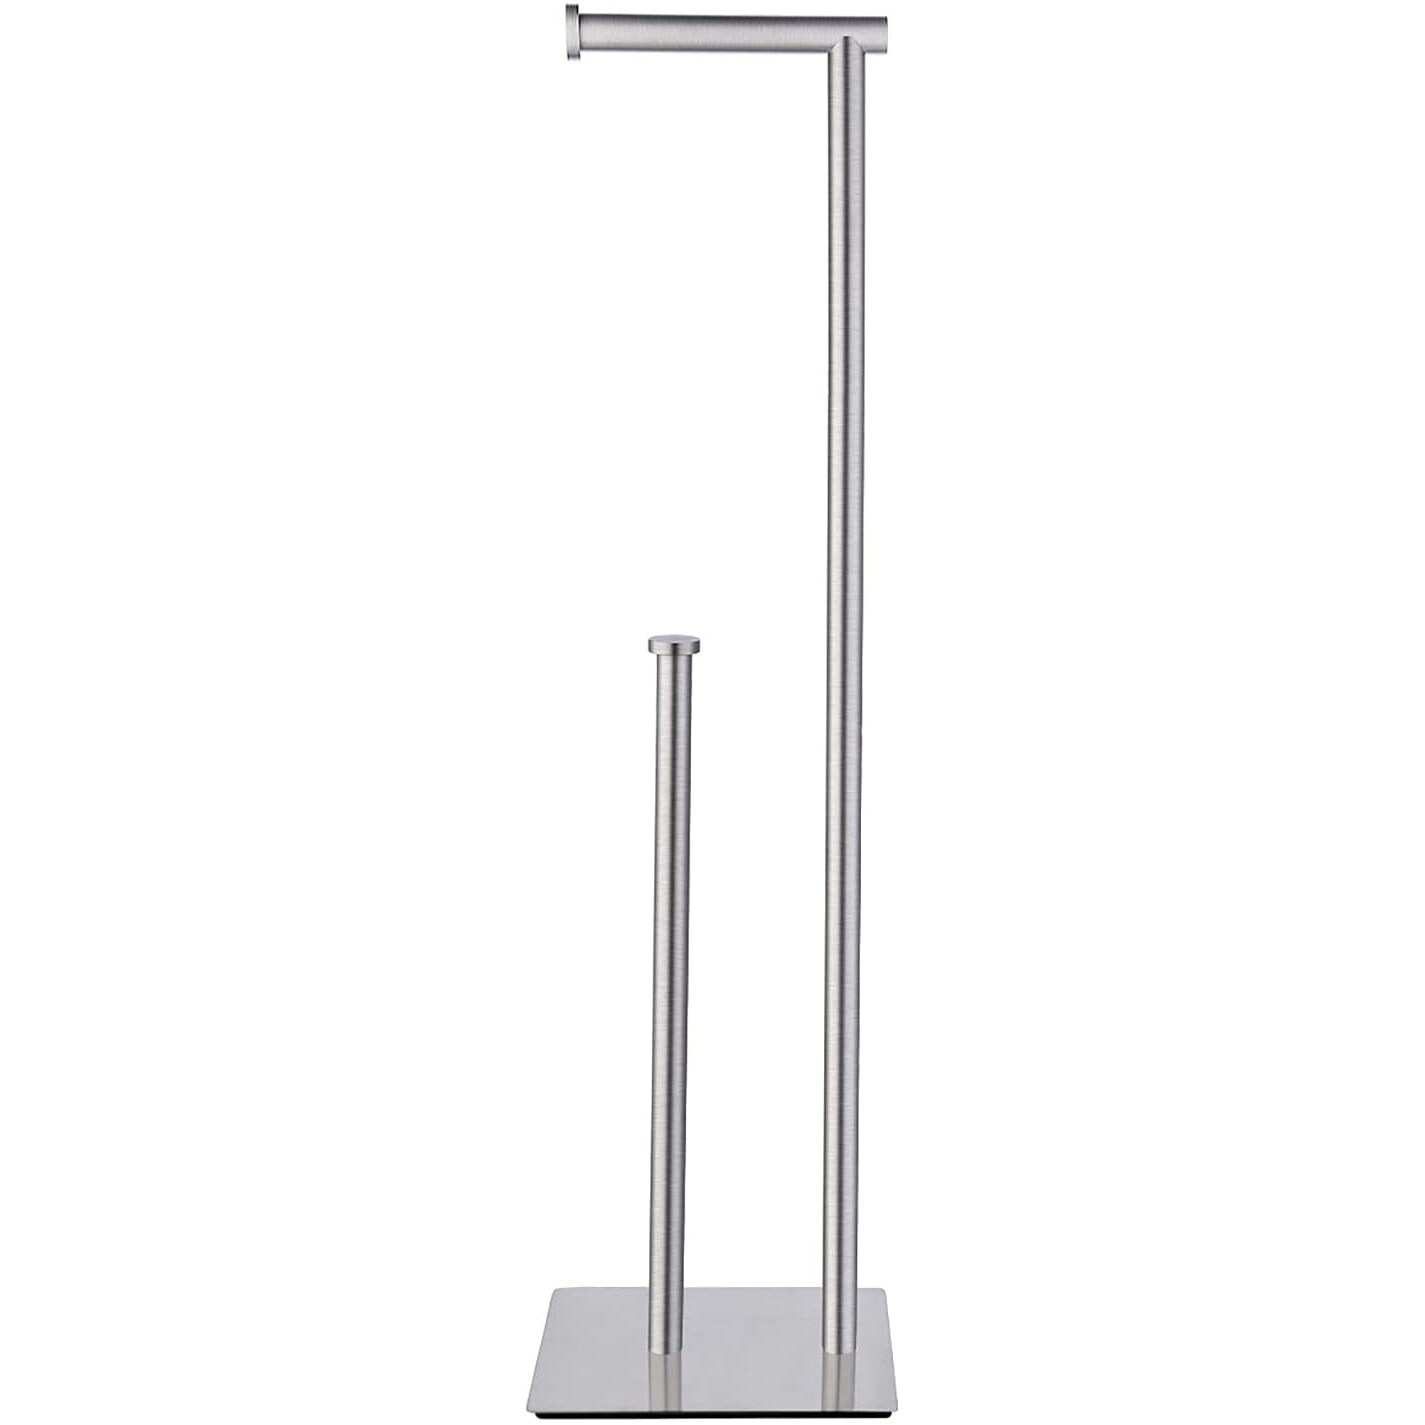 Sleek Toilet Paper Holder with Folding Arm and Reserve Compact Freestanding  Metal Holder - Diameter 8 inches X 22 H - Bed Bath & Beyond - 18072165